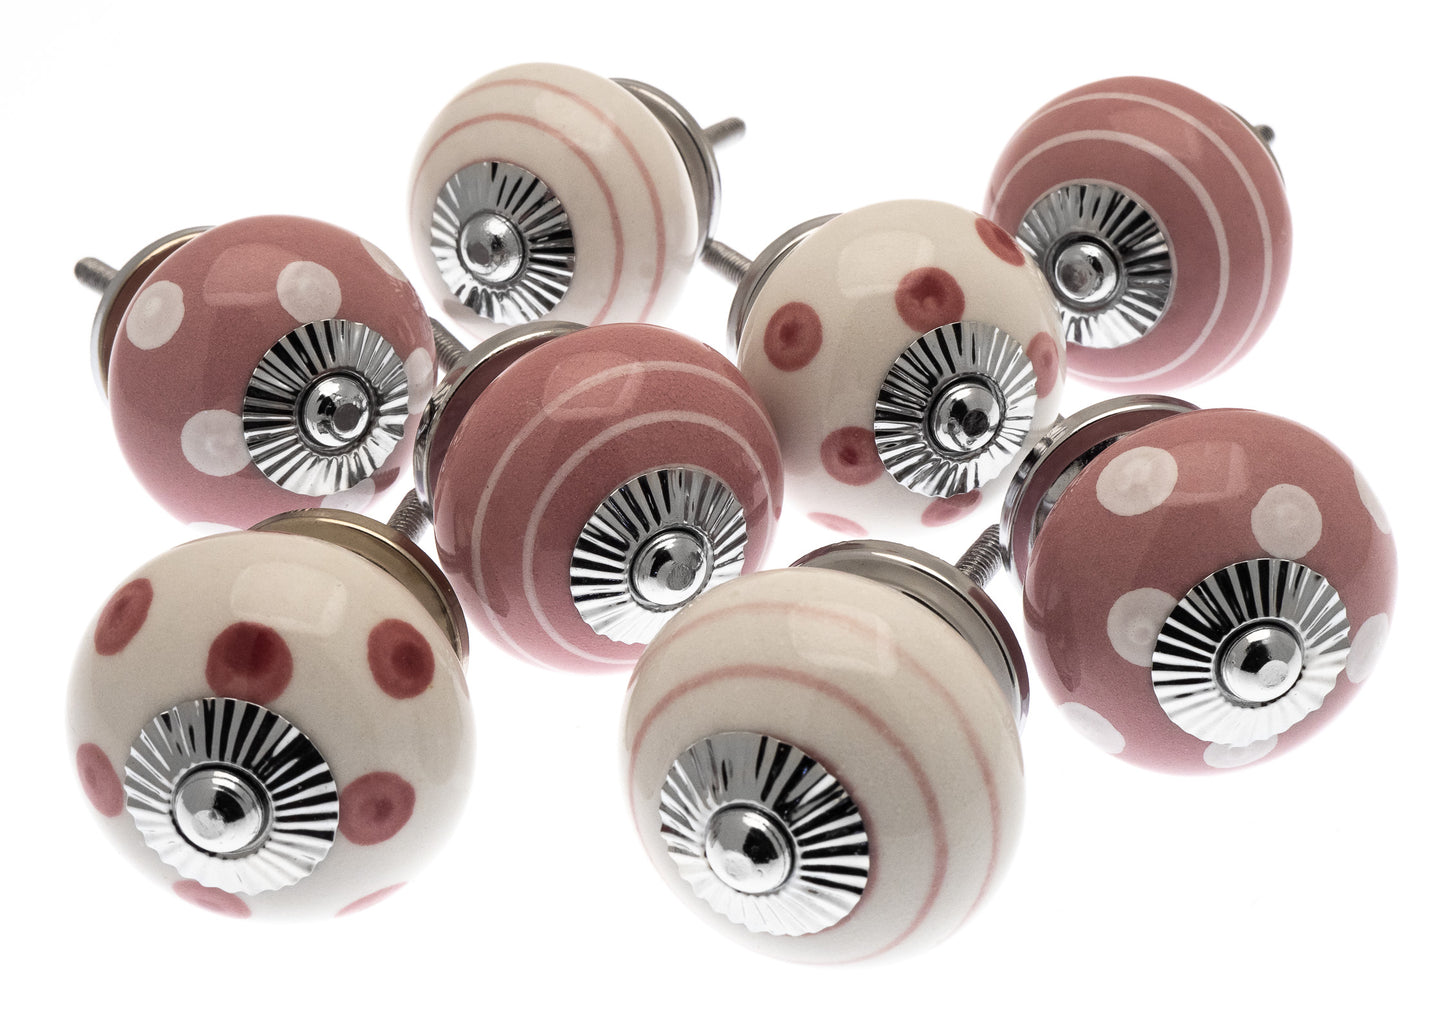 Pink Ceramic Cupboard Door Knobs in Hand Painted Spots and Stripes